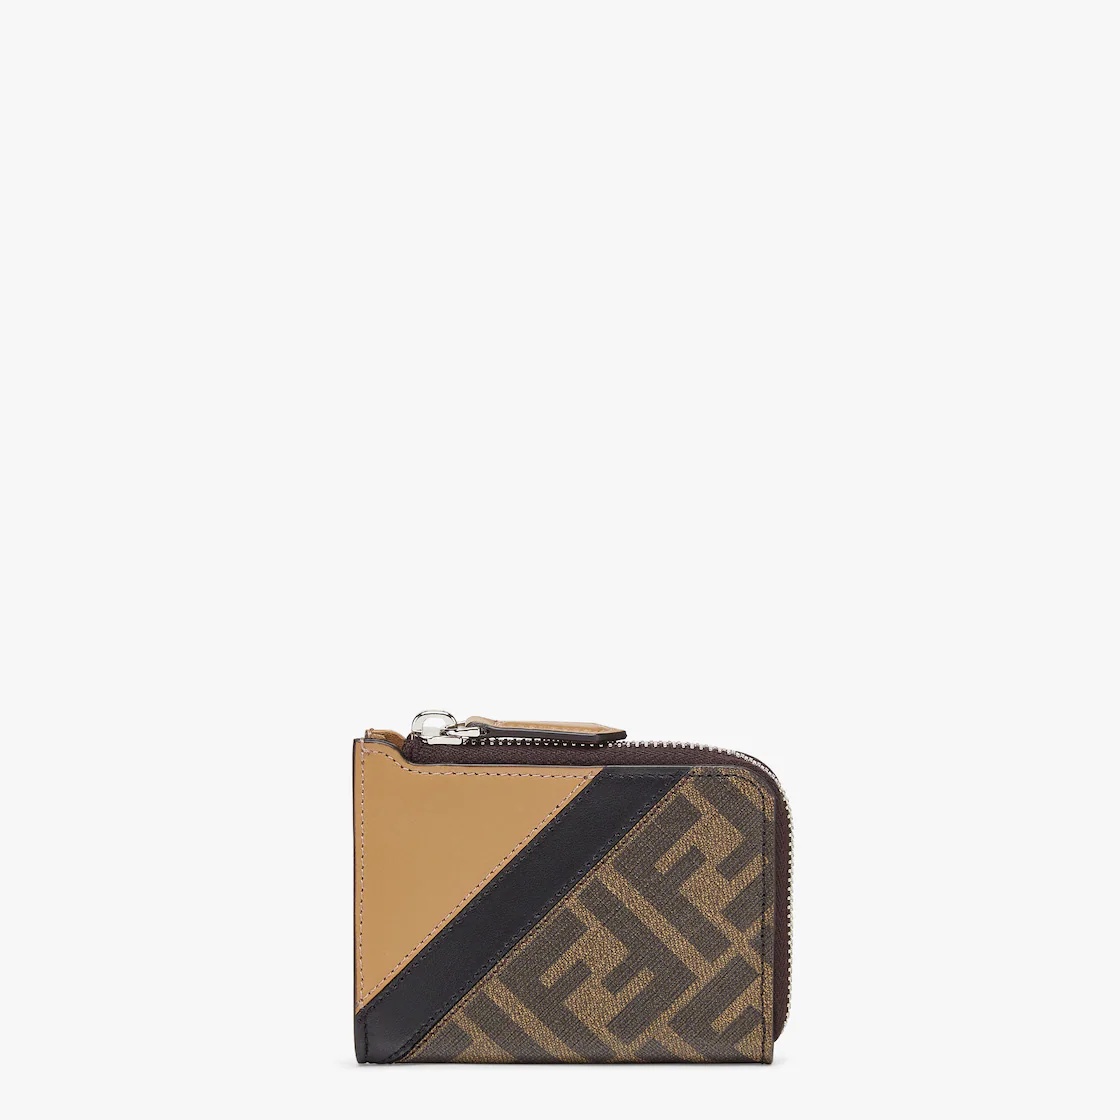 Card holder with two side zips. Made of textured fabric with FF motif in brown and tobacco. Embellis - 1